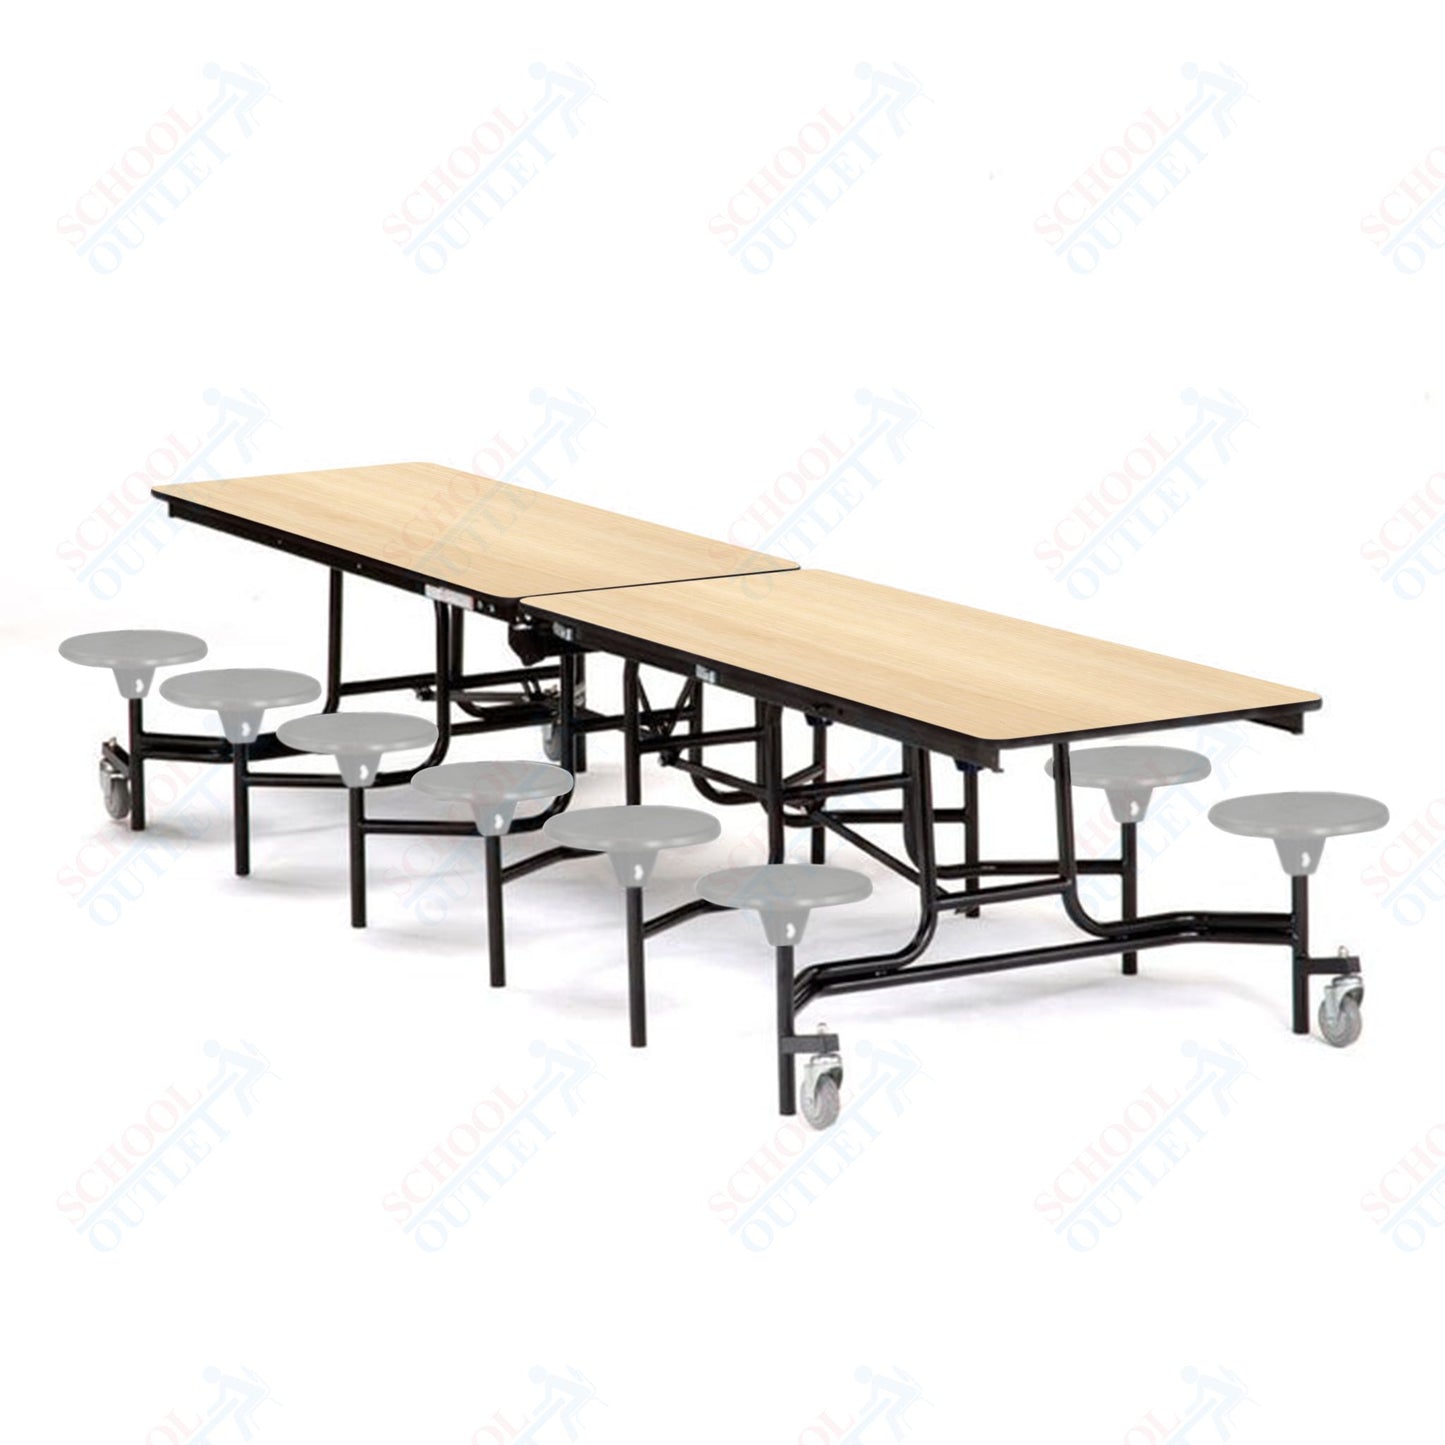 Mobile Cafeteria Lunchroom Stool Table - 30" W x 12' L - 12 Stools - MDF Core - Protect Edge - Chrome Frame